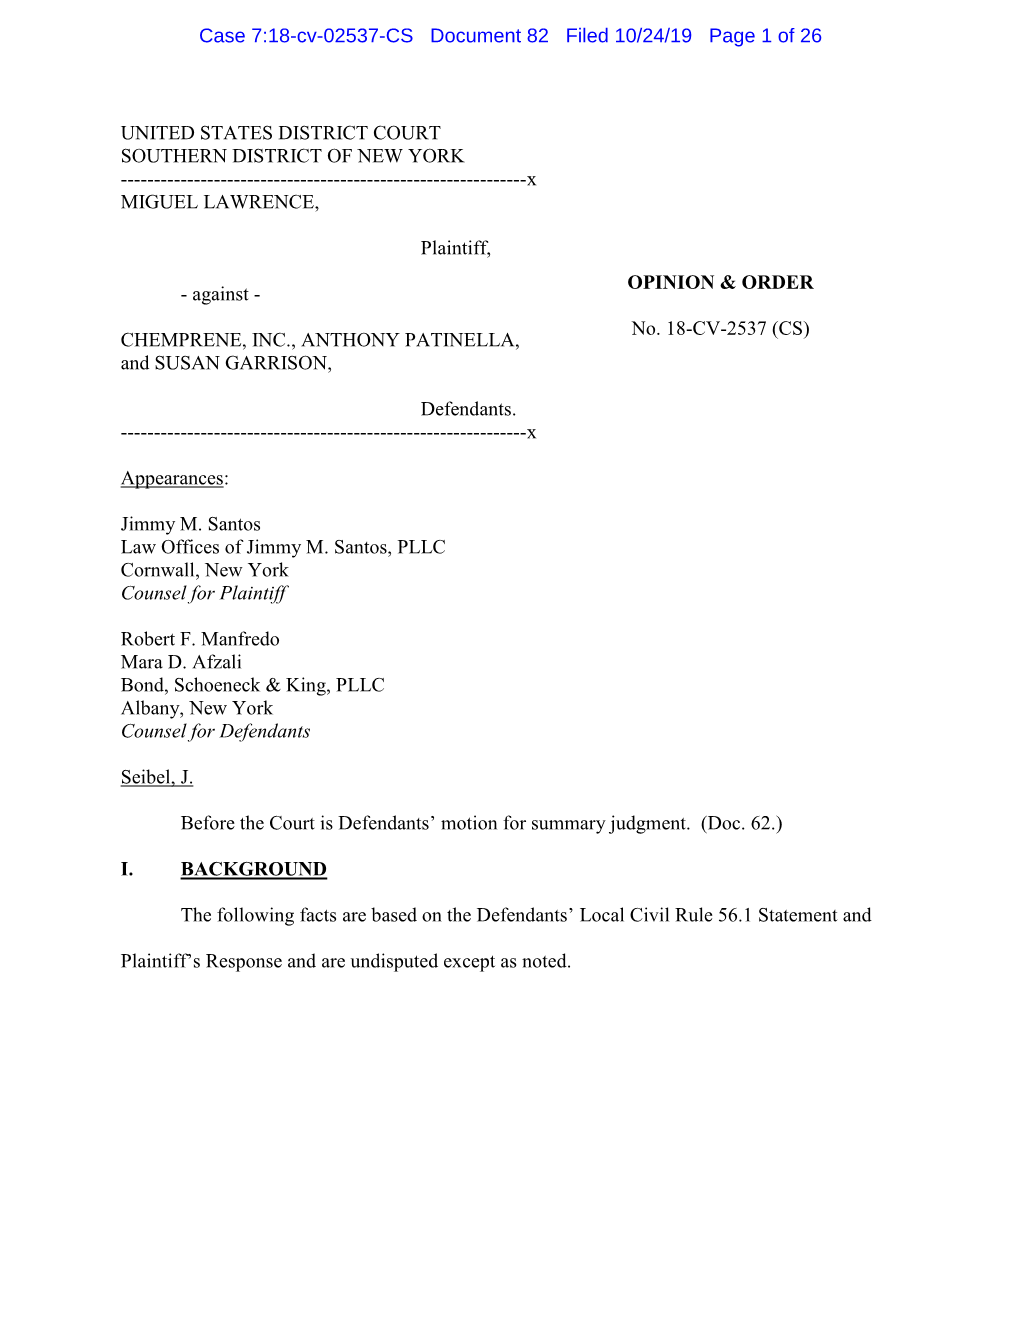 Case 7:18-Cv-02537-CS Document 82 Filed 10/24/19 Page 1 of 26